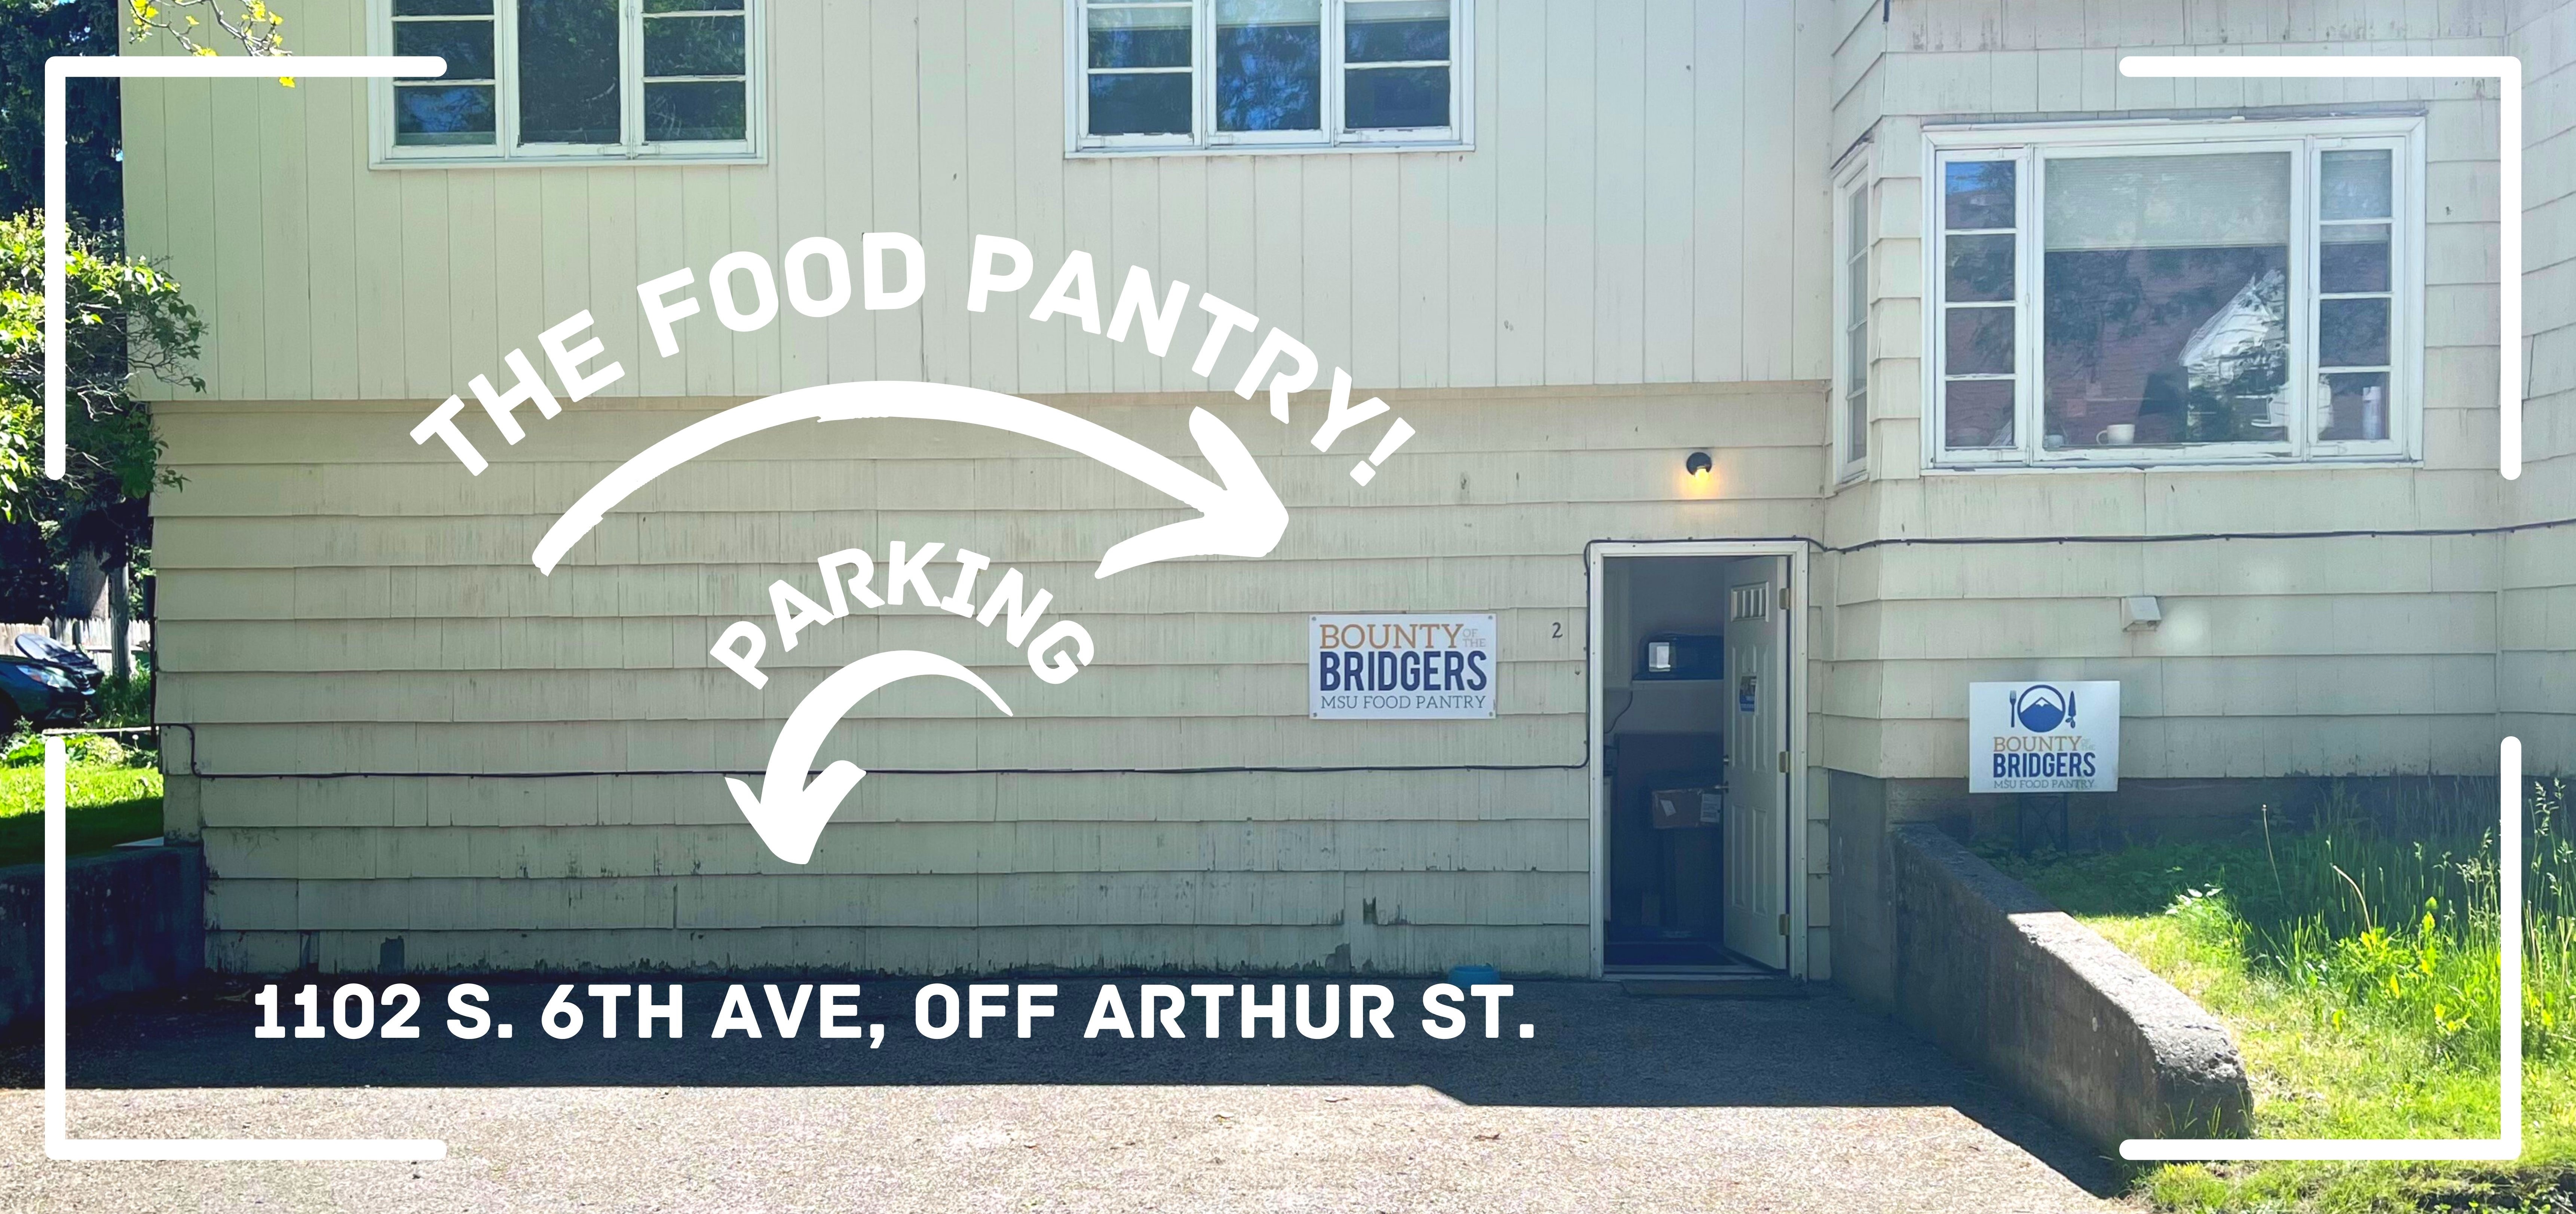 You may park directly in front of the entrance to the food pantry. 